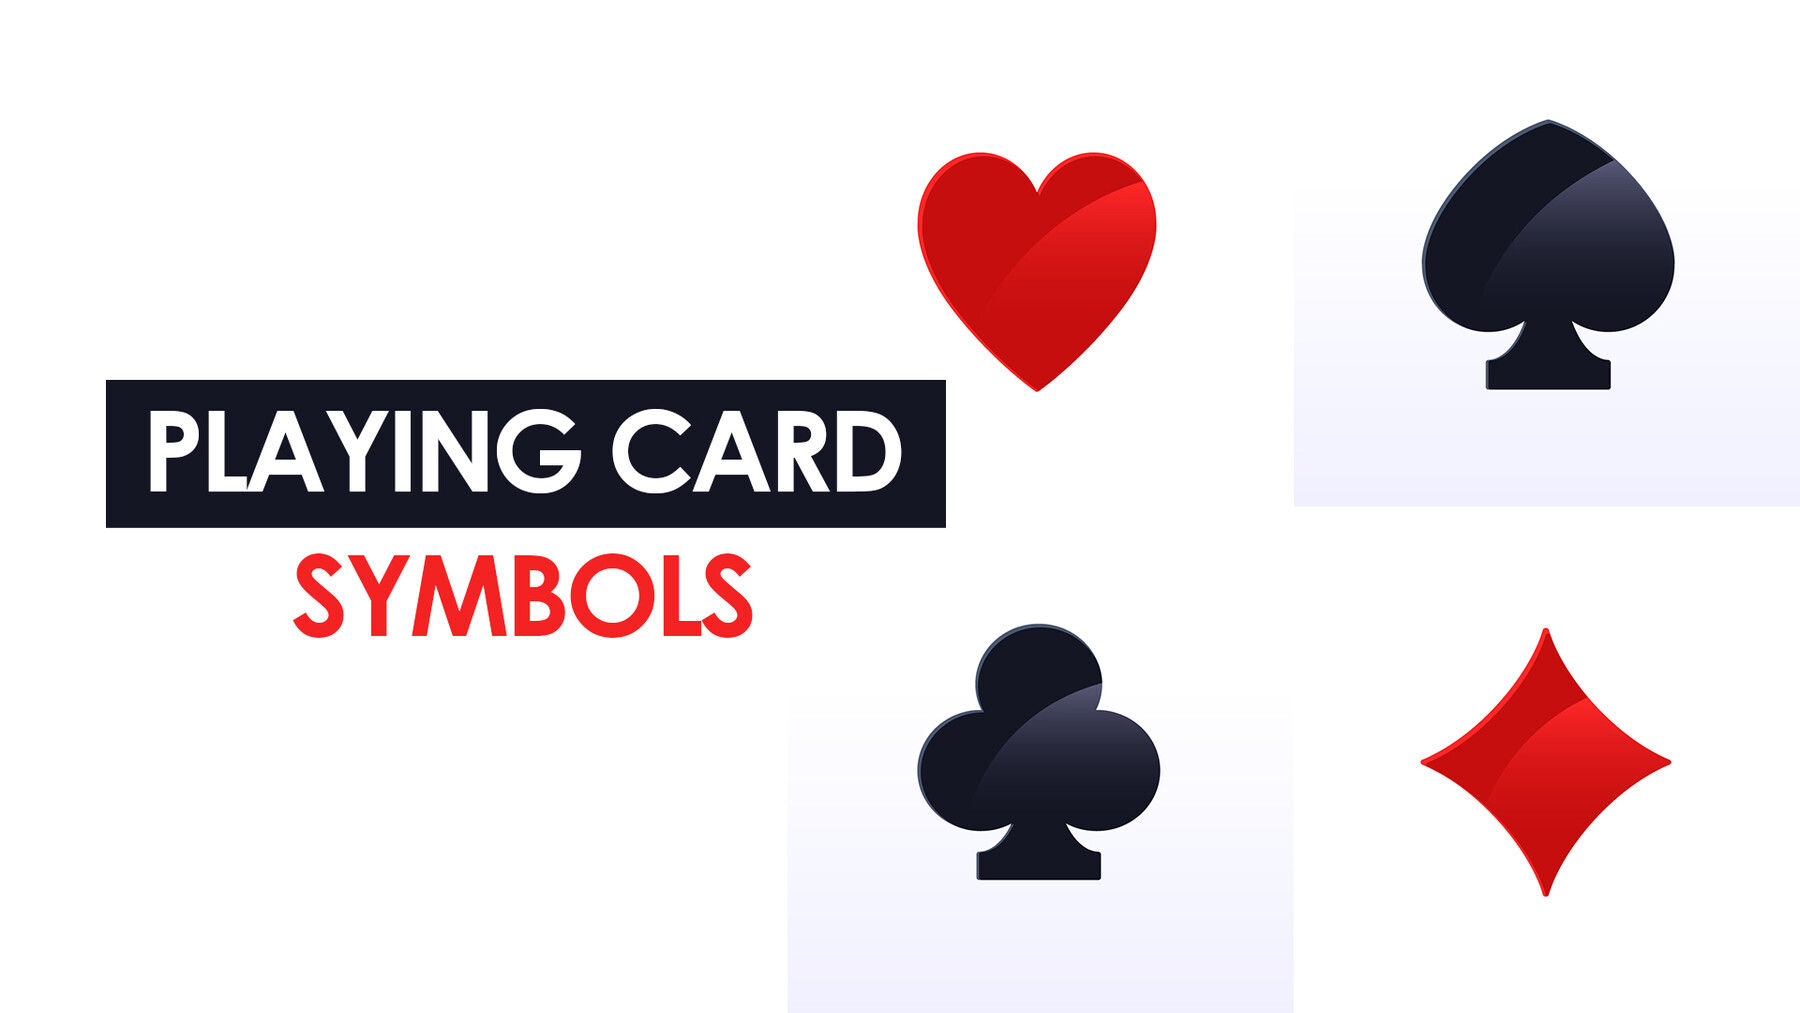 ArtStation - Playing Cards Symbol - Hearts, Diamonds, Spades, and Clubs ...